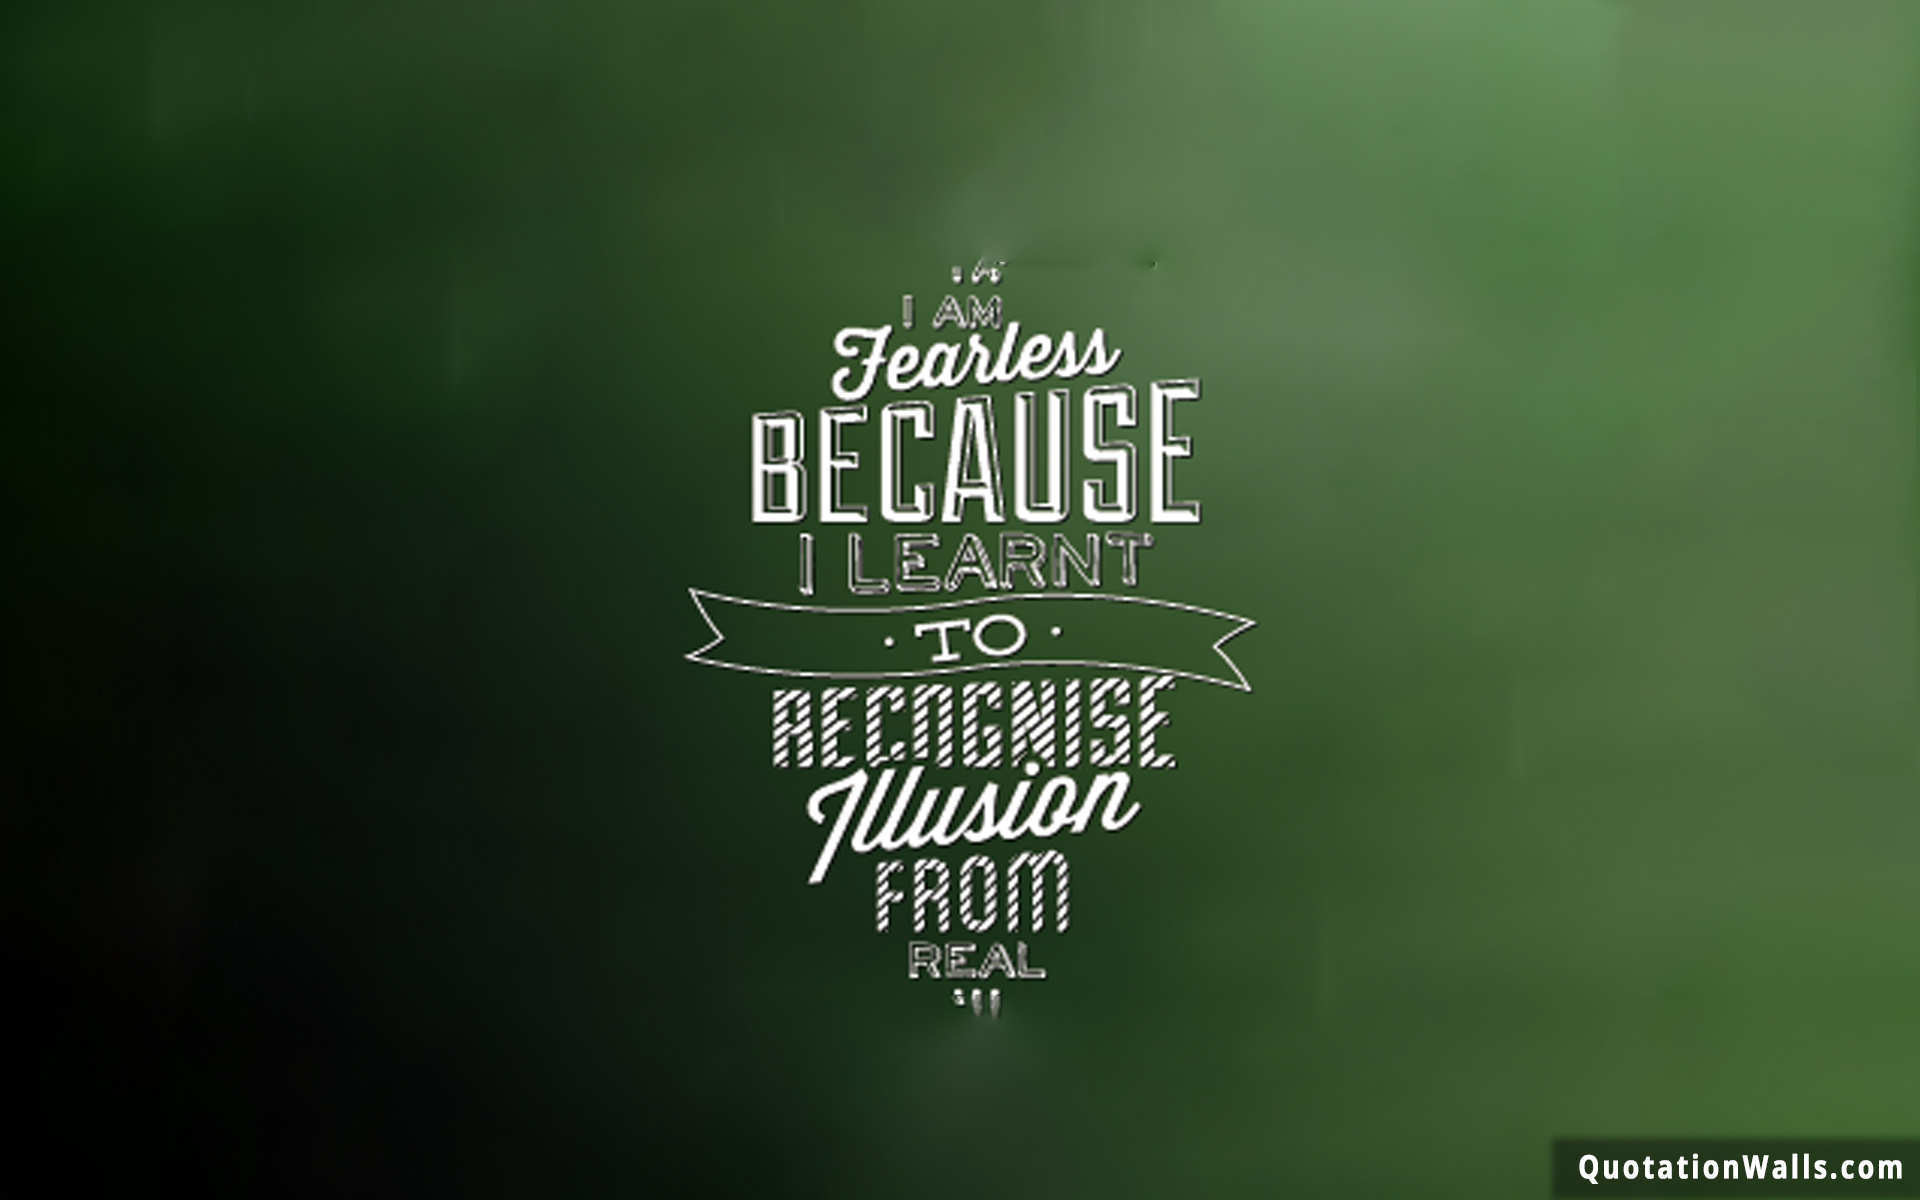 attitude wallpapers hd,green,font,text,calligraphy,logo